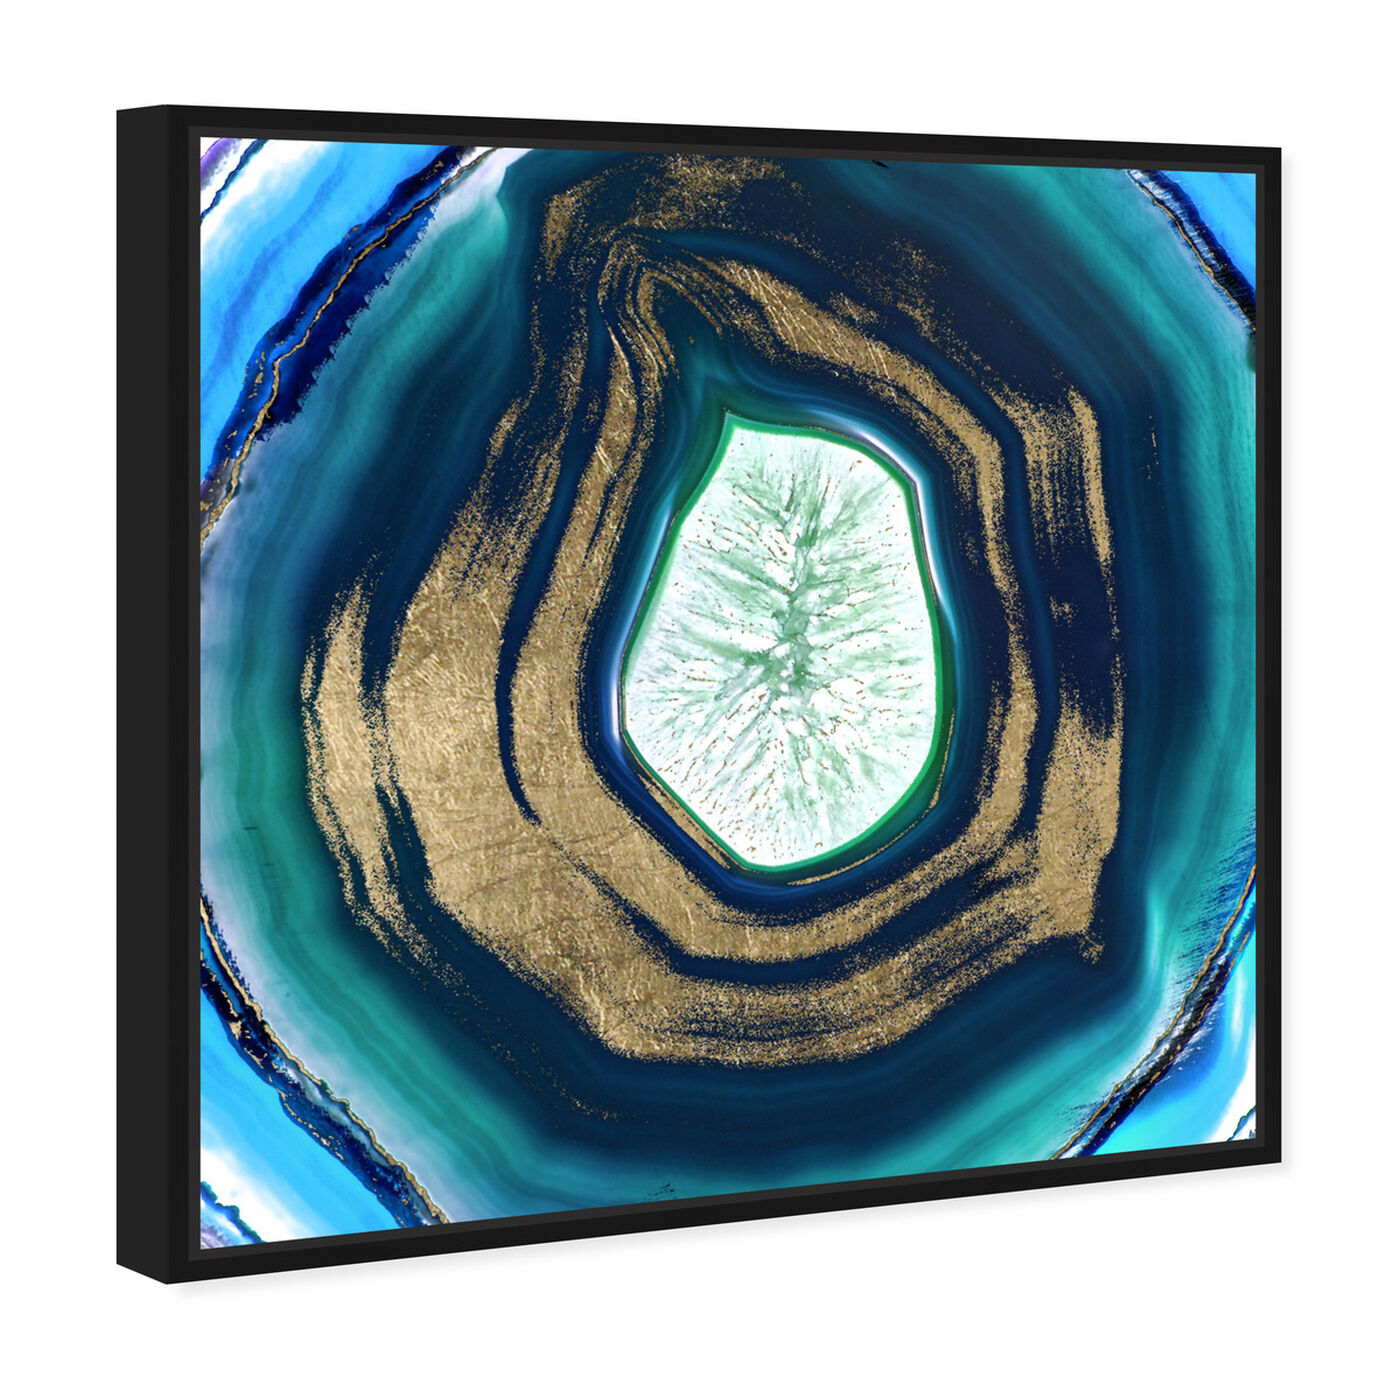 Angled view of Bluelove Geo featuring abstract and crystals art.